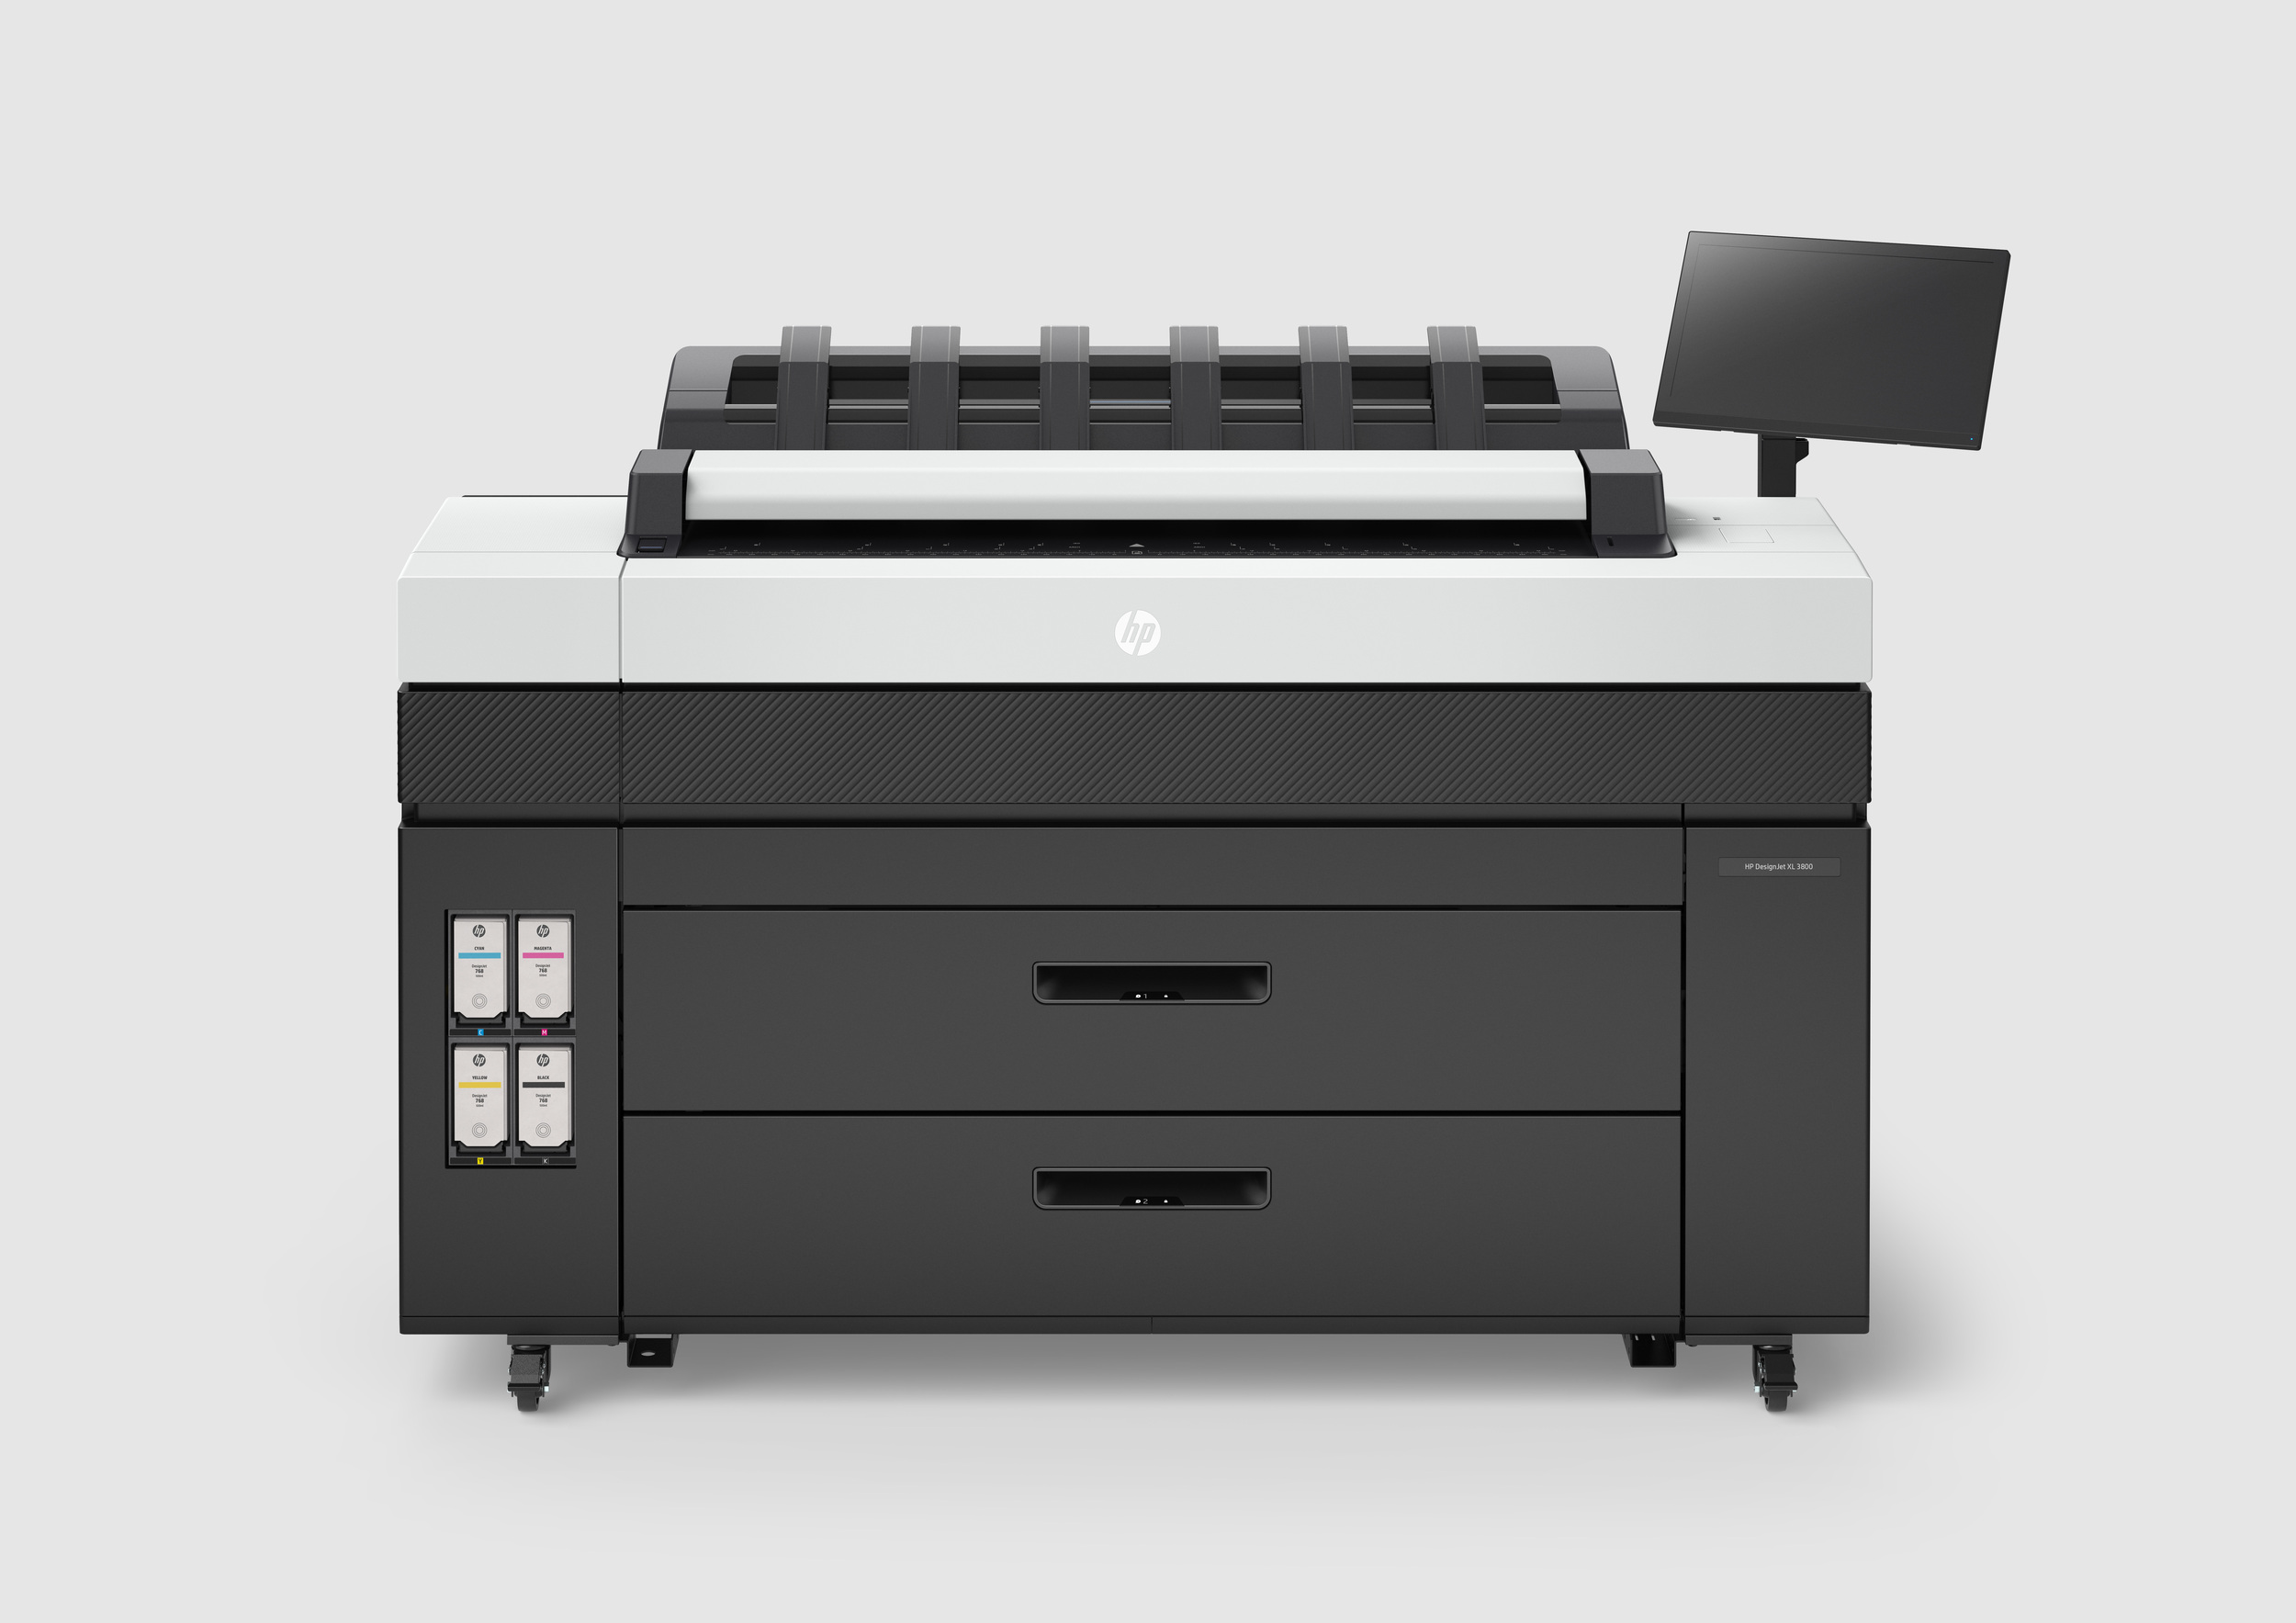 HP introduces a new range of 36-inch Large Format Printers for Copy-shops, AEC & Enterprises